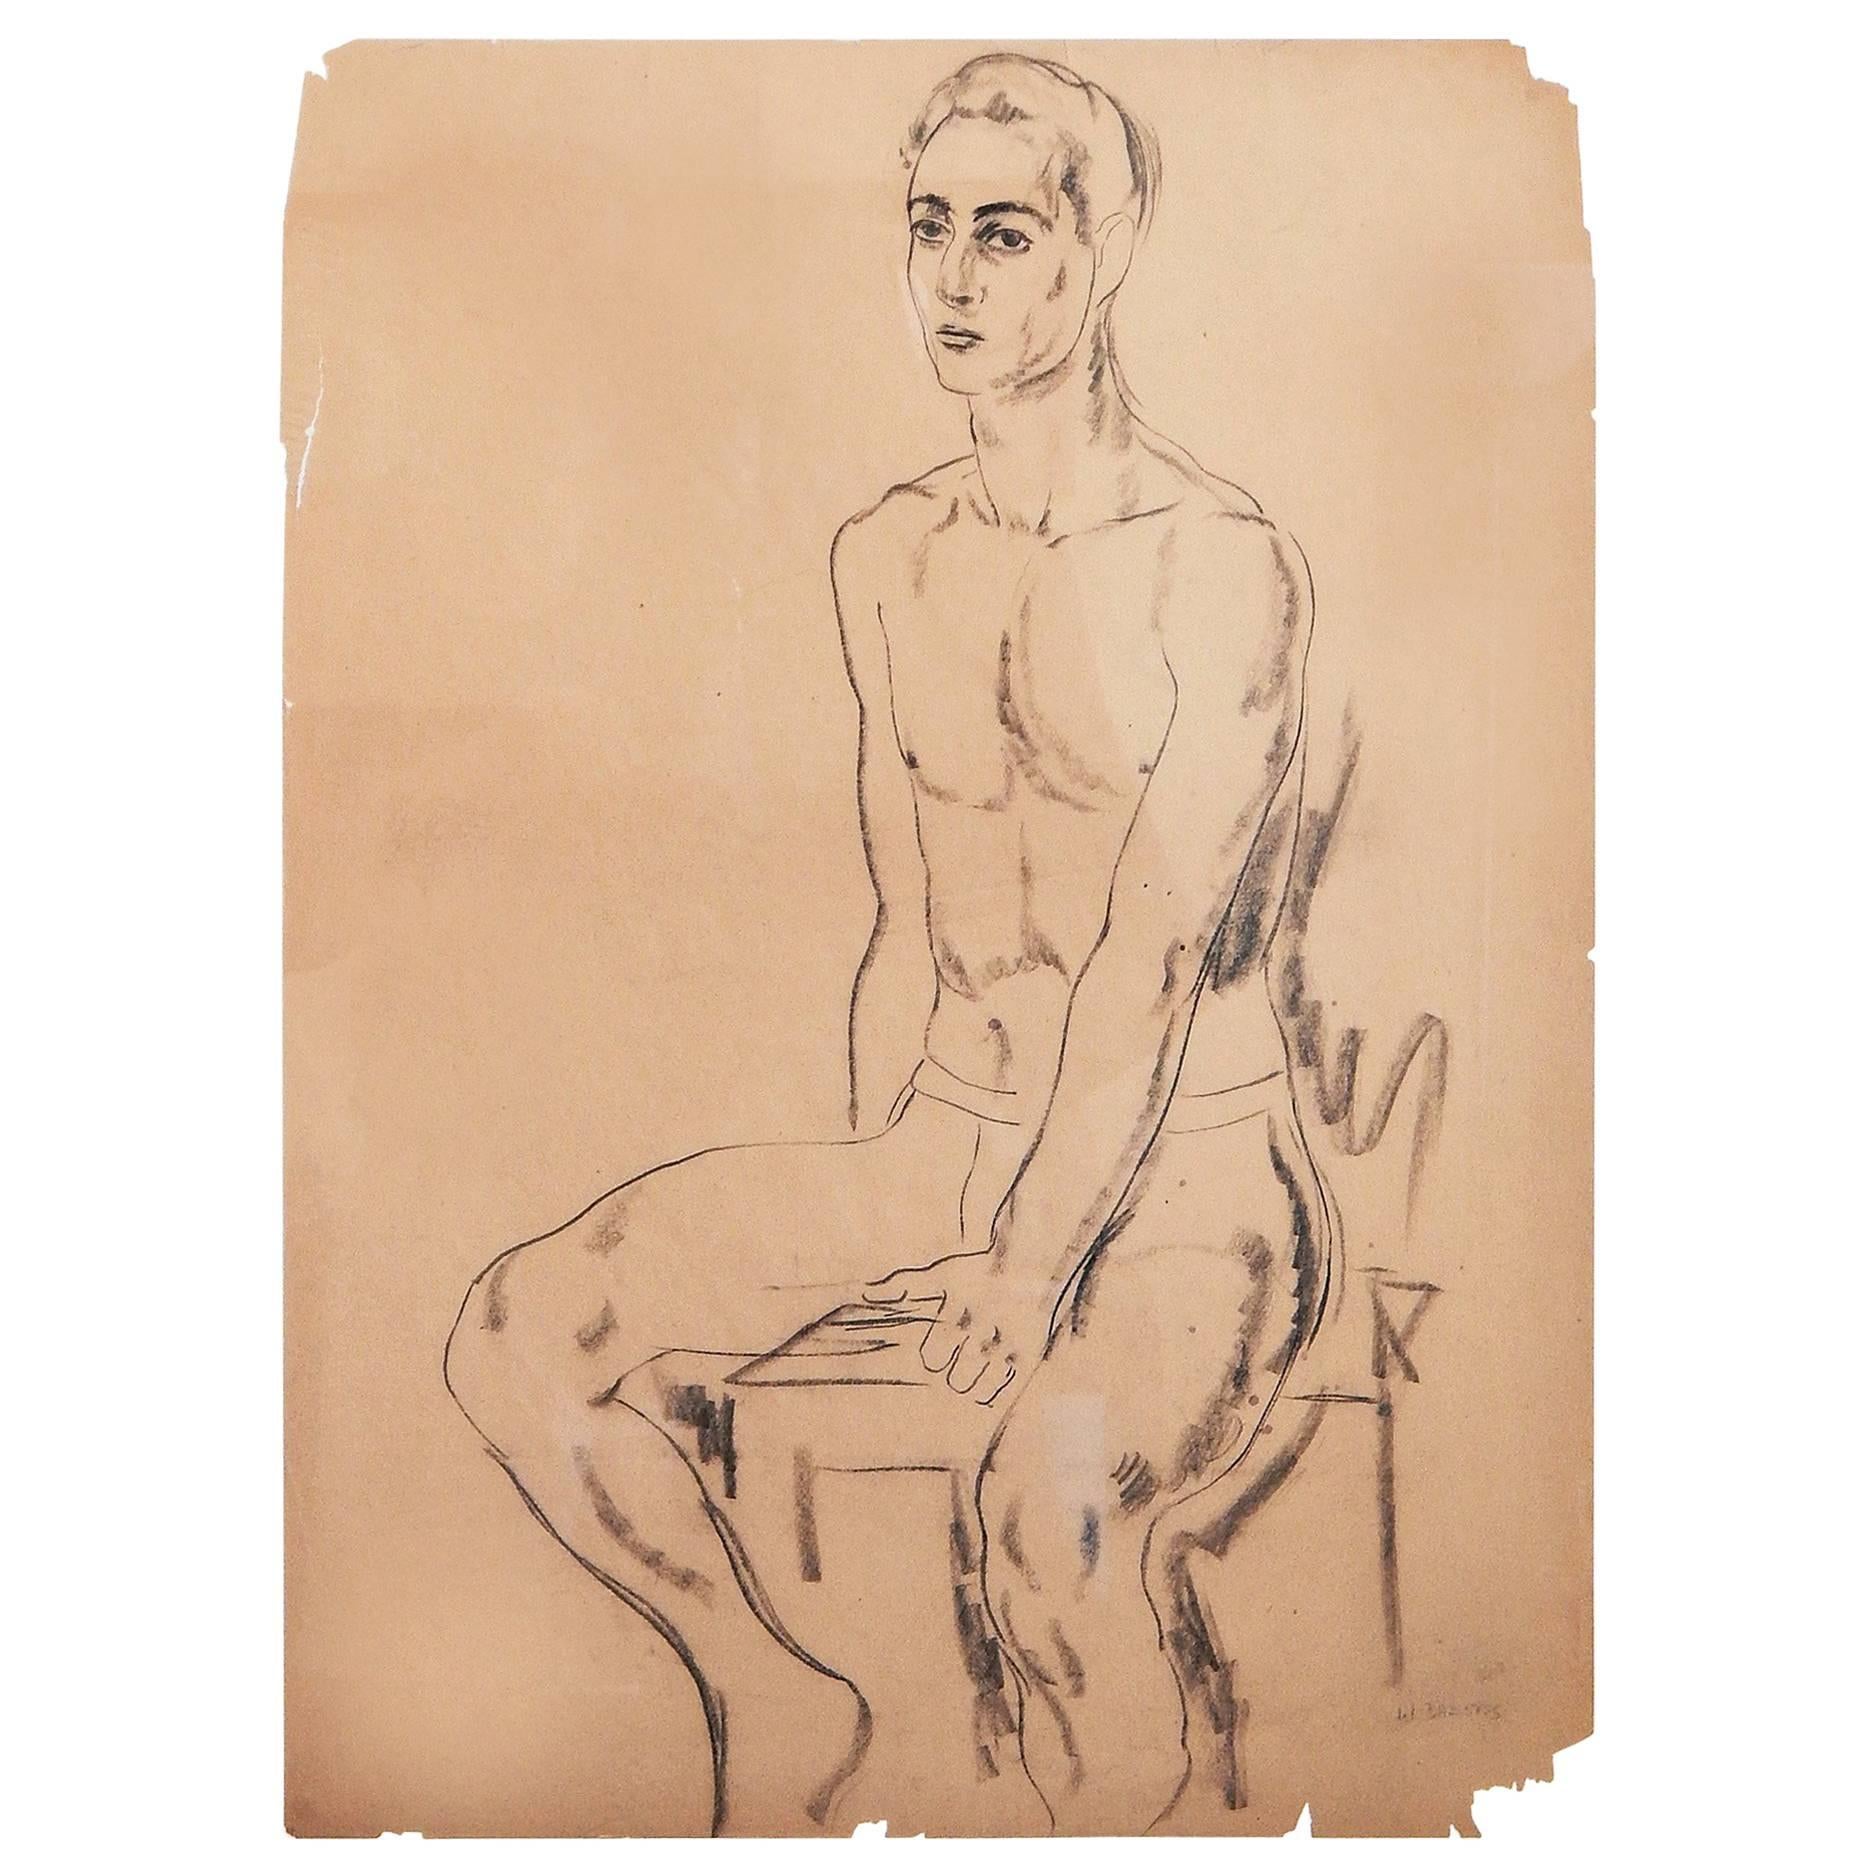 "Male Nude, " Early and Fine Drawing by William Baziotes at National Academy